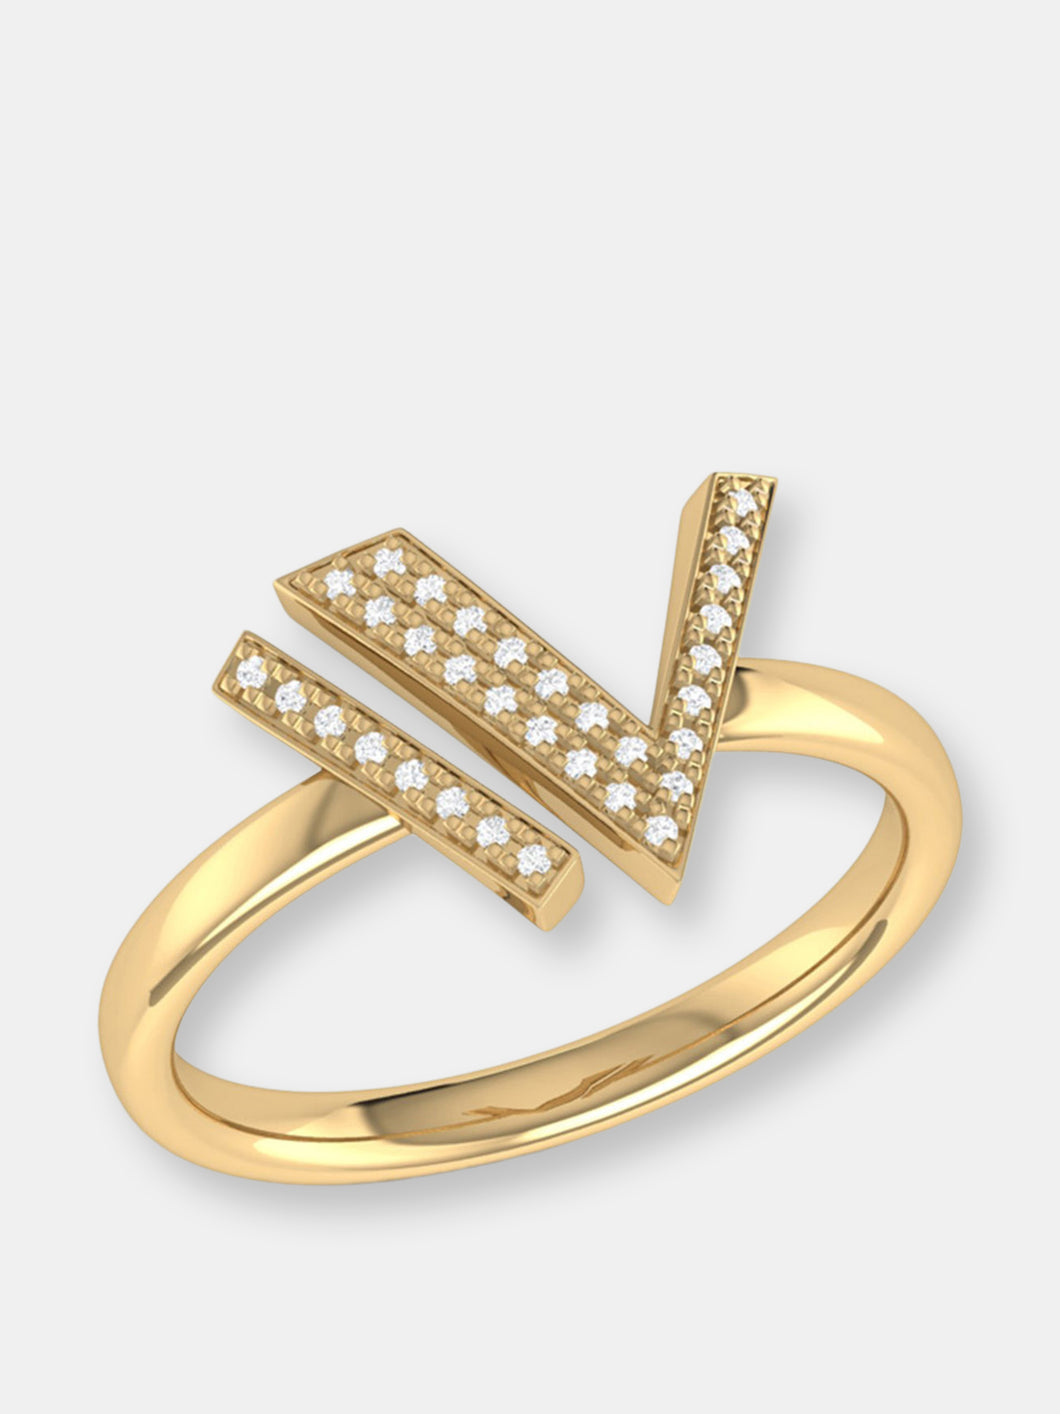 Visionary IV Open Diamond Ring in 14K Yellow Gold Vermeil on Sterling Silver